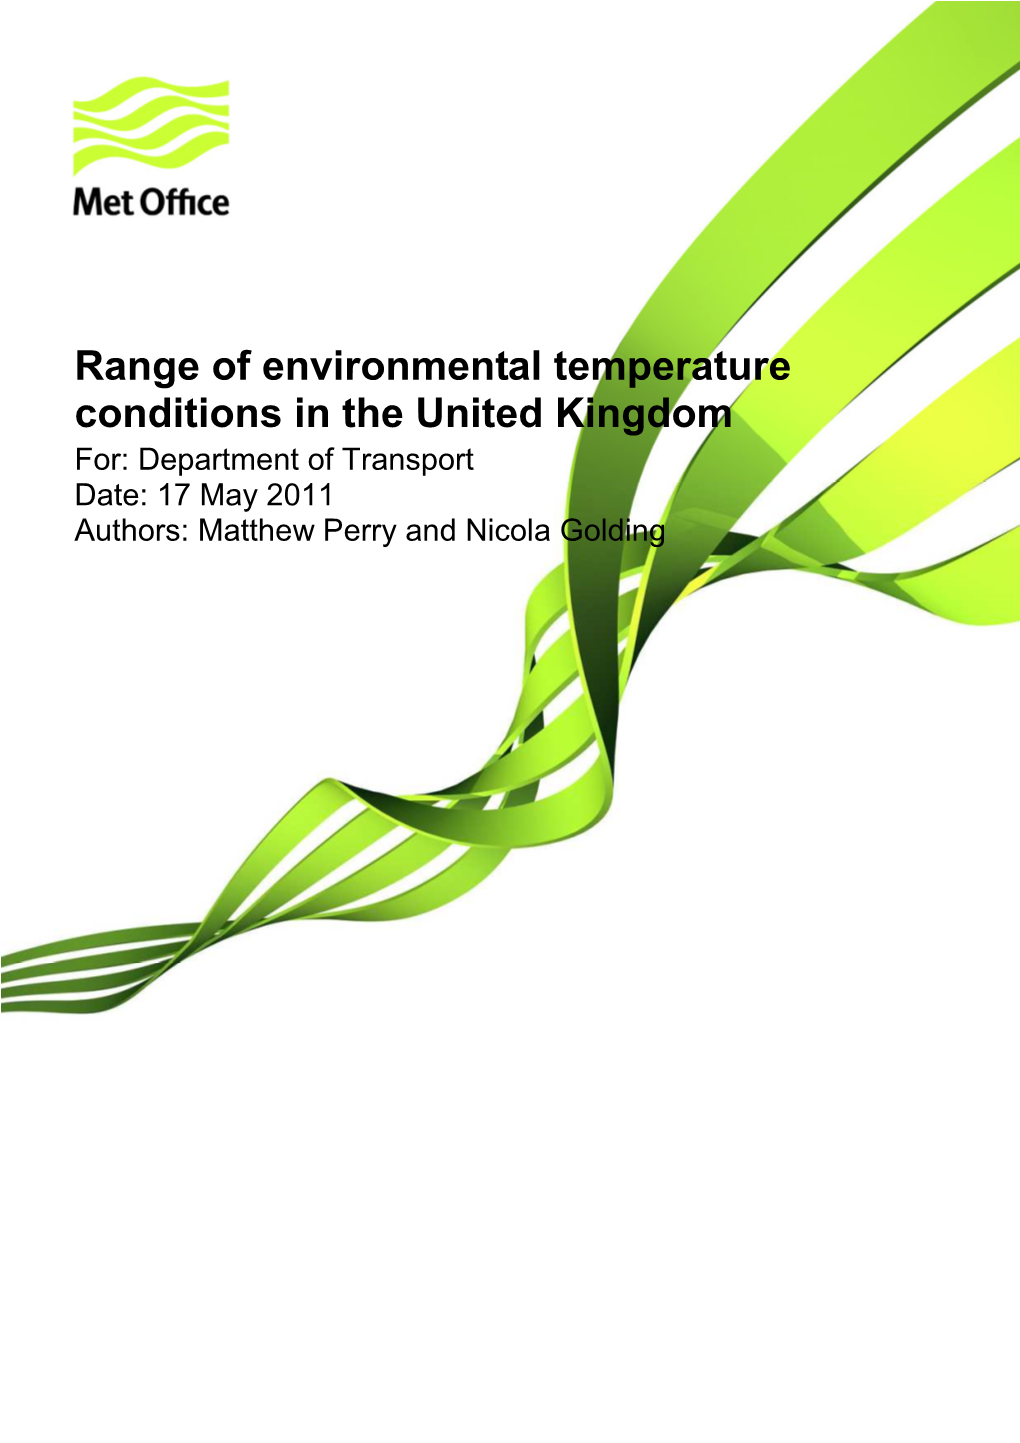 Range of Environmental Temperature Conditions in the United Kingdom For: Department of Transport Date: 17 May 2011 Authors: Matthew Perry and Nicola Golding